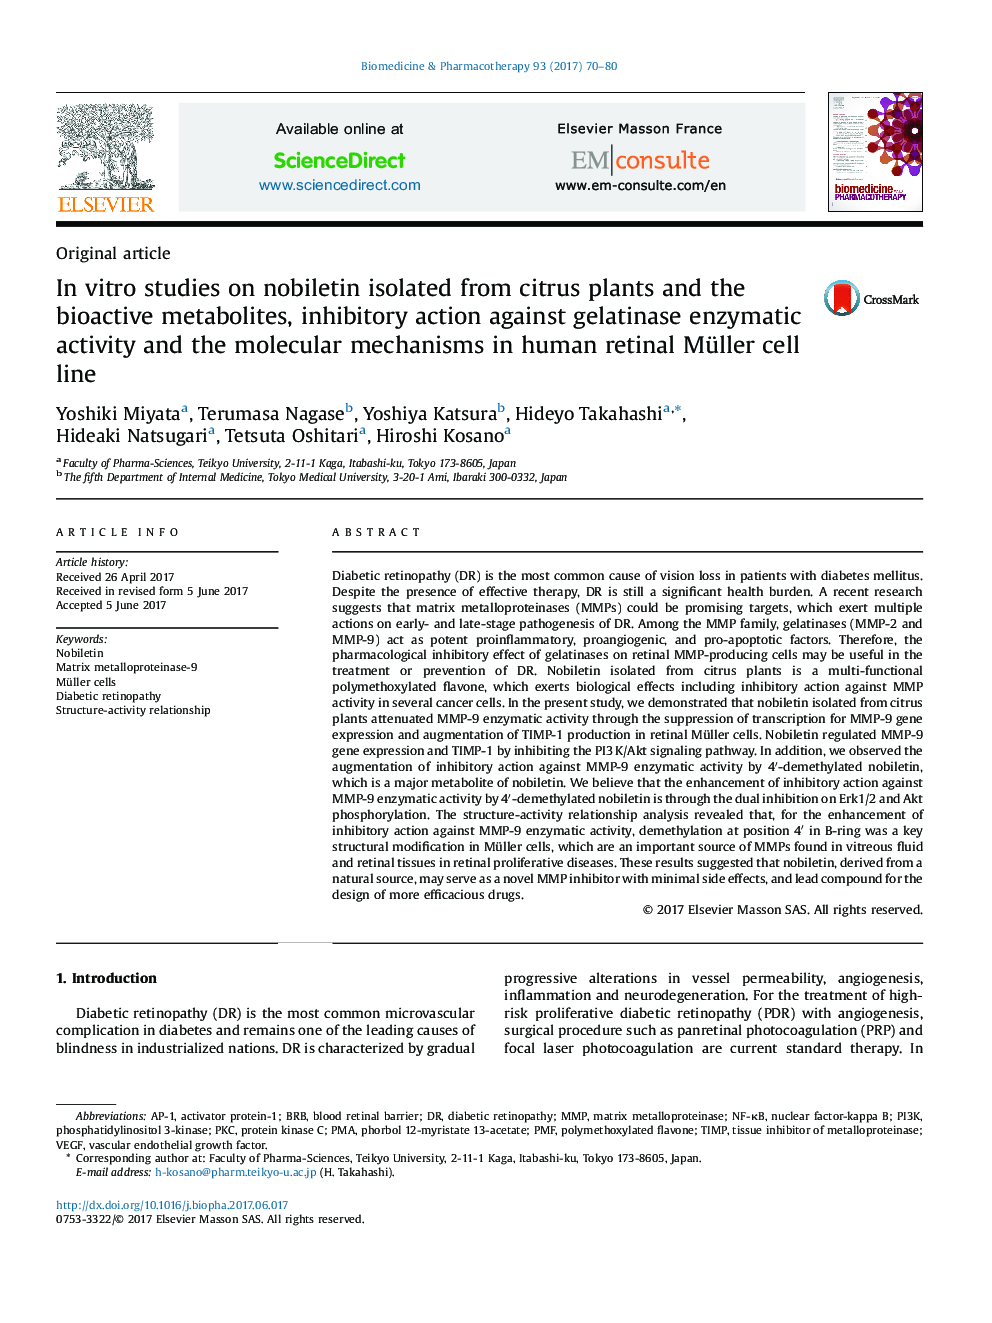 In vitro studies on nobiletin isolated from citrus plants and the bioactive metabolites, inhibitory action against gelatinase enzymatic activity and the molecular mechanisms in human retinal Müller cell line